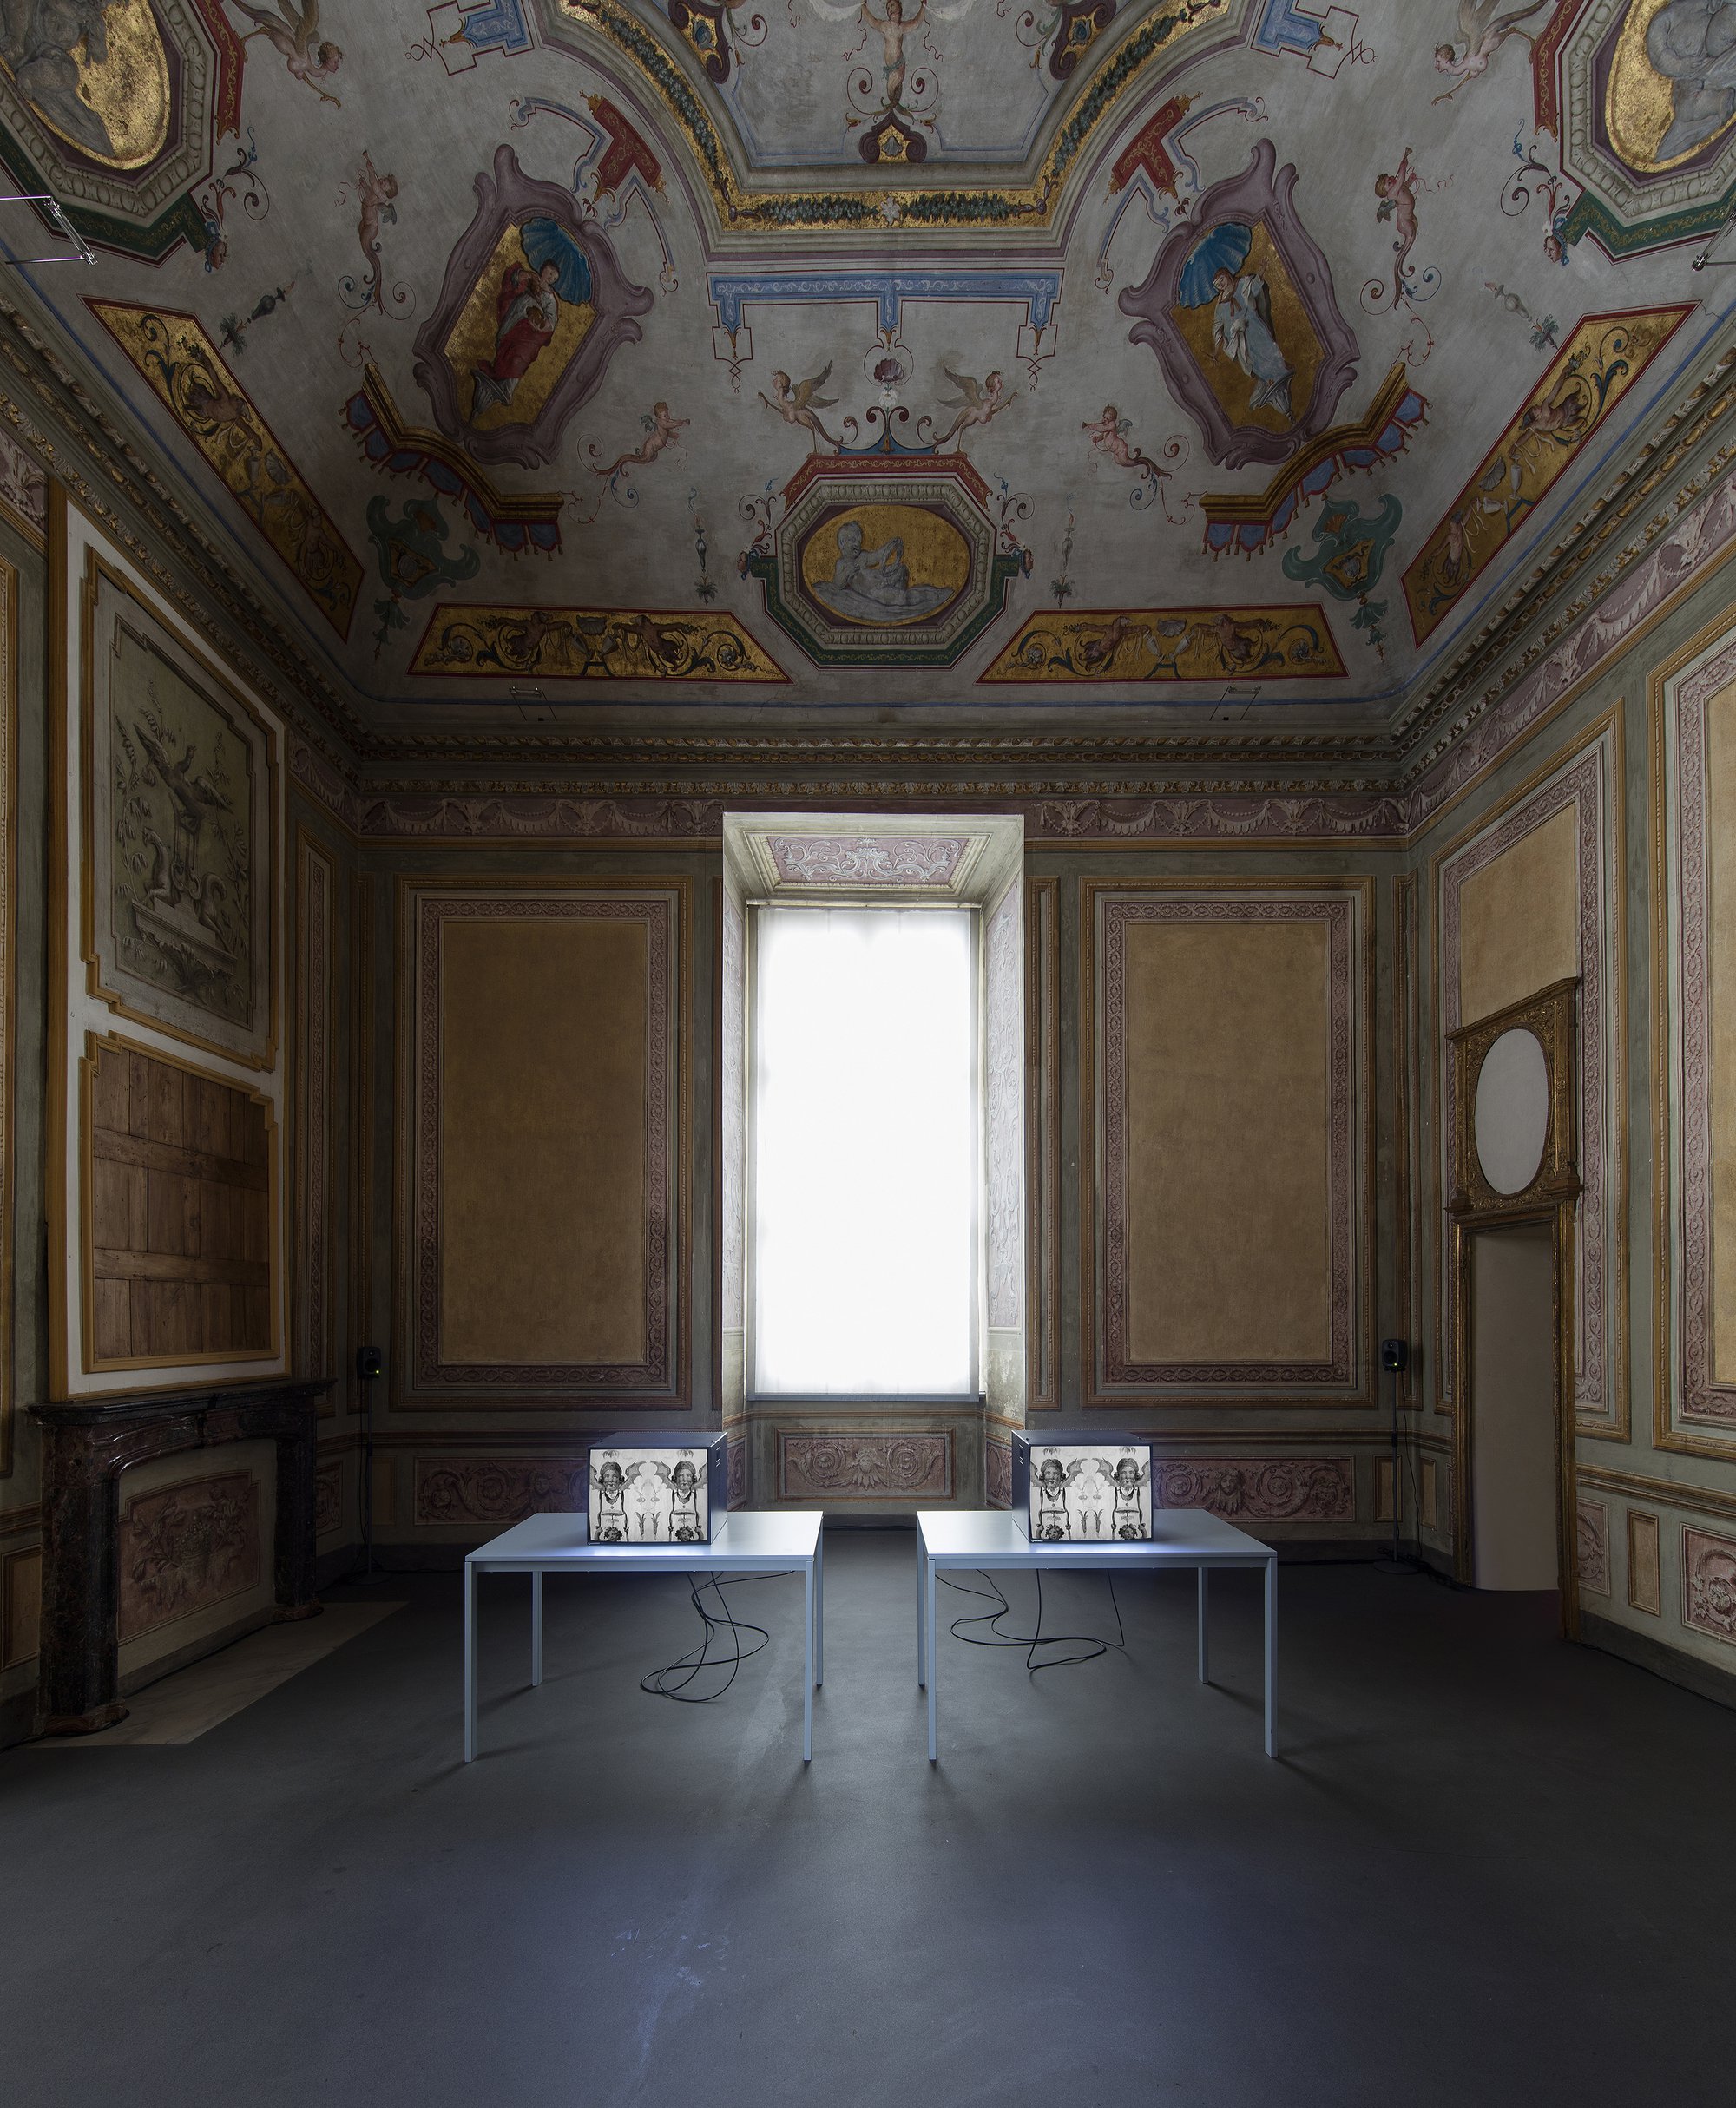 James Richards, Alms for the Birds, two channel video with sound, 6 min. 17 sec., 2020. Installation view, From the Home to the Museum, from the Museum to the Home, Castello di Rivoli, Turin, 2020